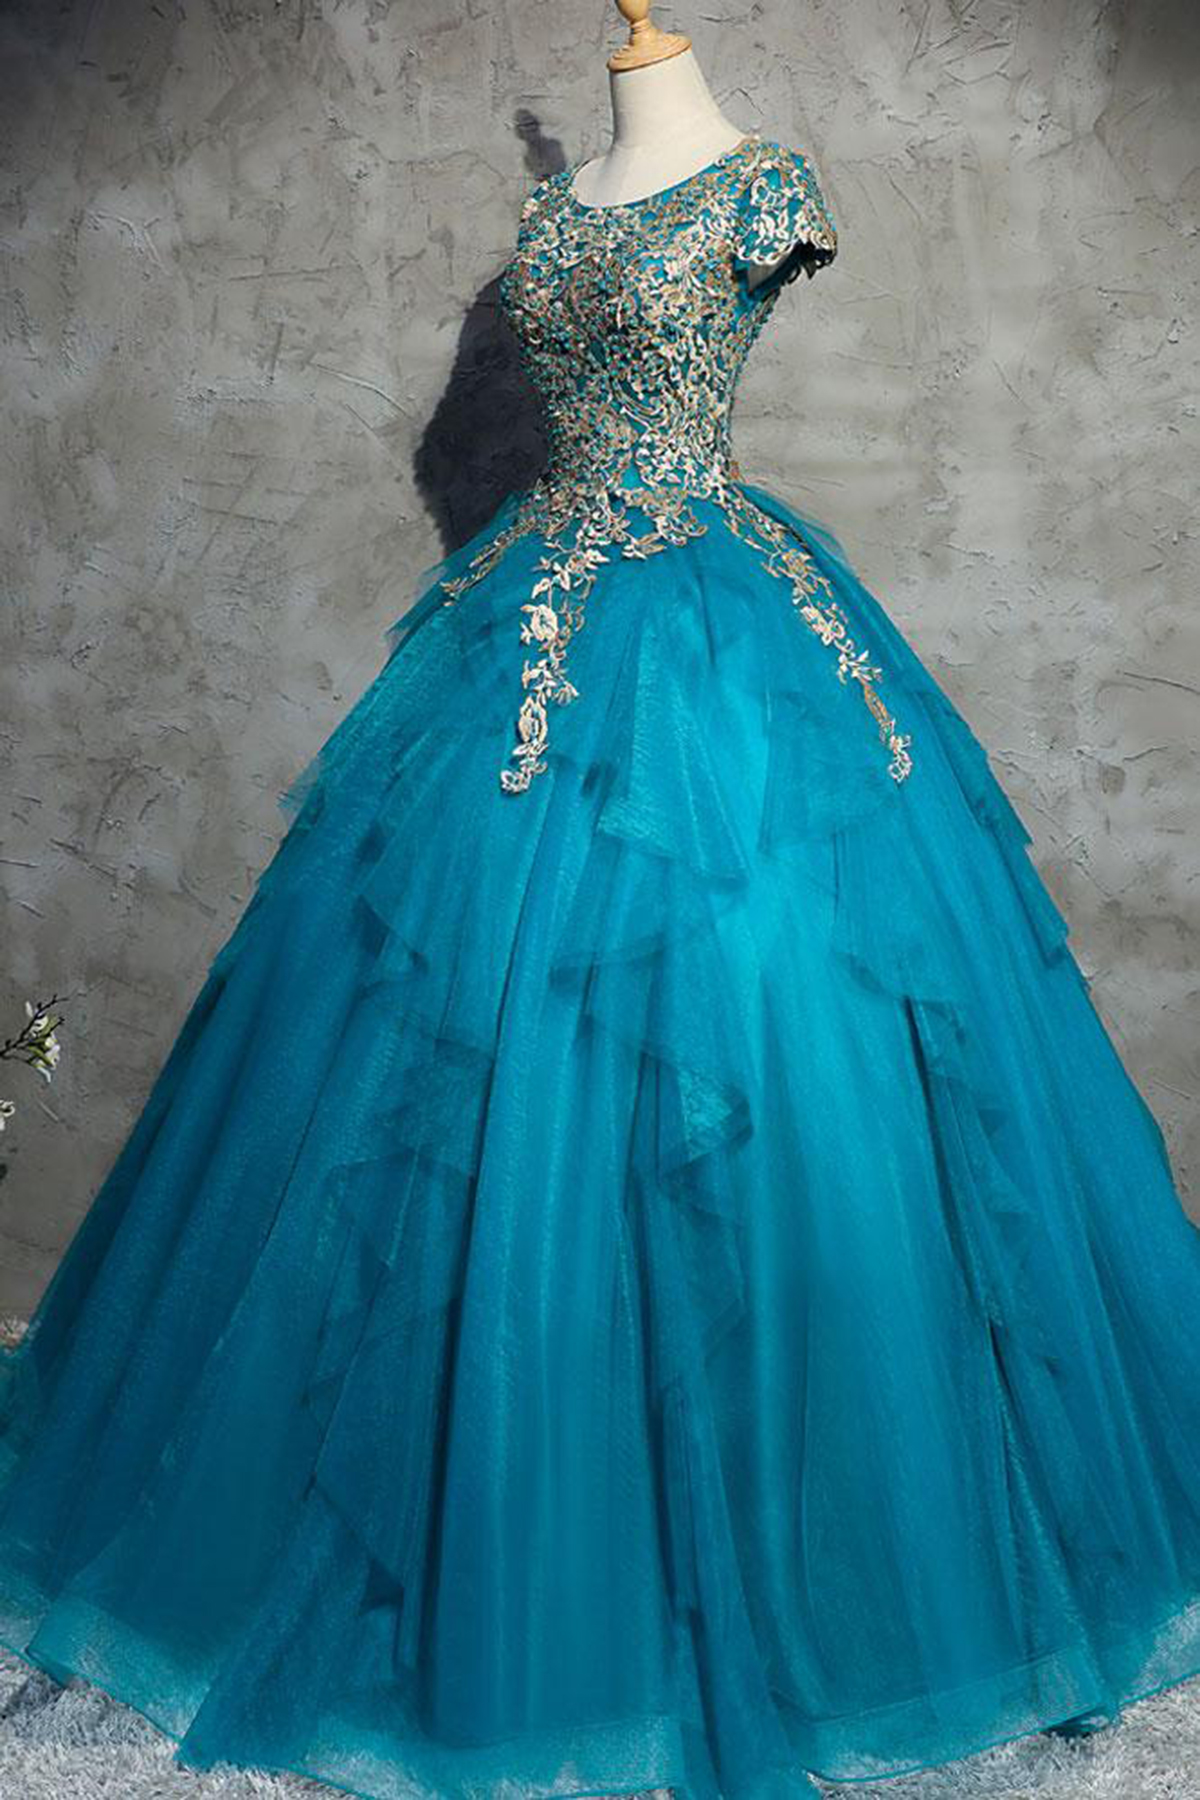 Quinceanera Dresses Ball Gown | Party Dress Parties 15 Years | Birthday Dress  15 Years - Quinceanera Dresses - Aliexpress